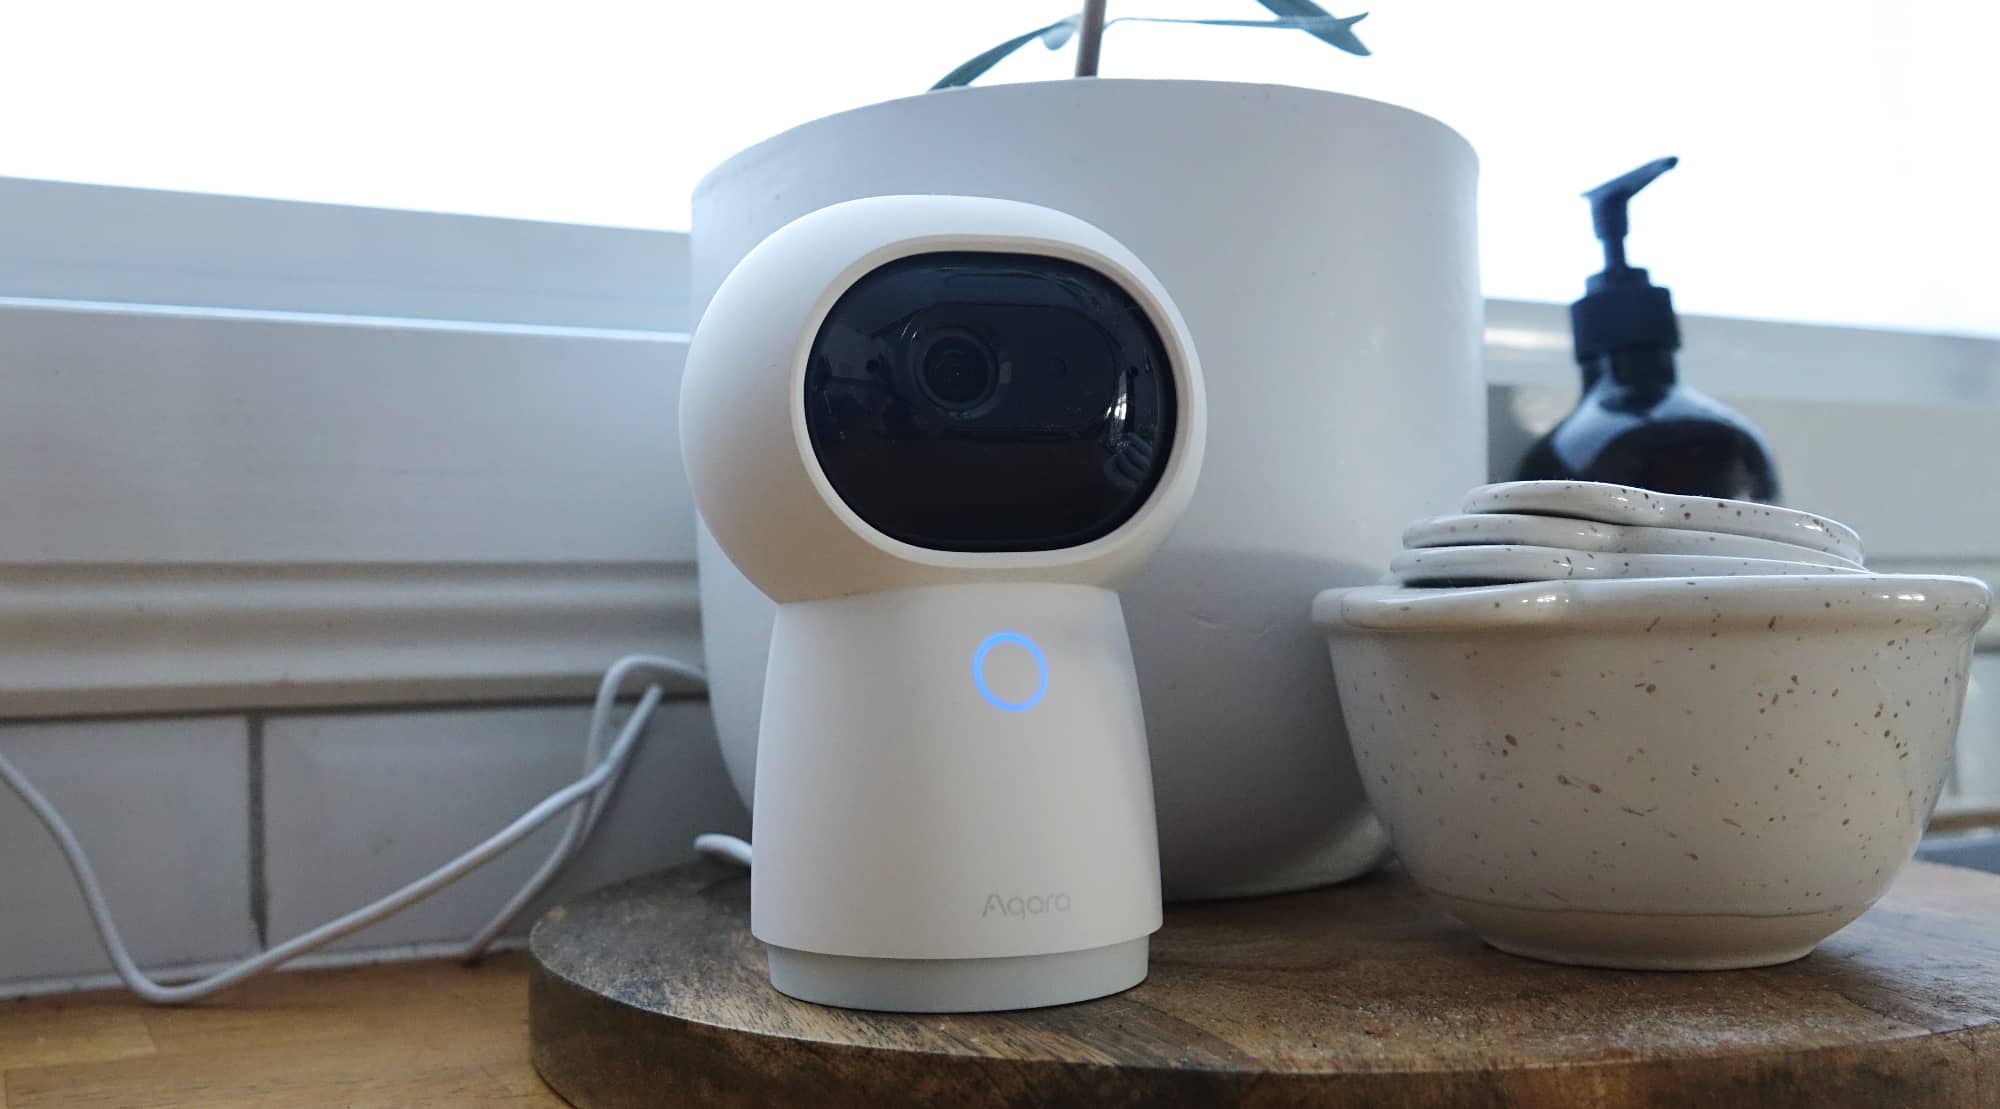 Aqara Camera Hub G3 Review. Two Smart Devices in One - Gearbrain